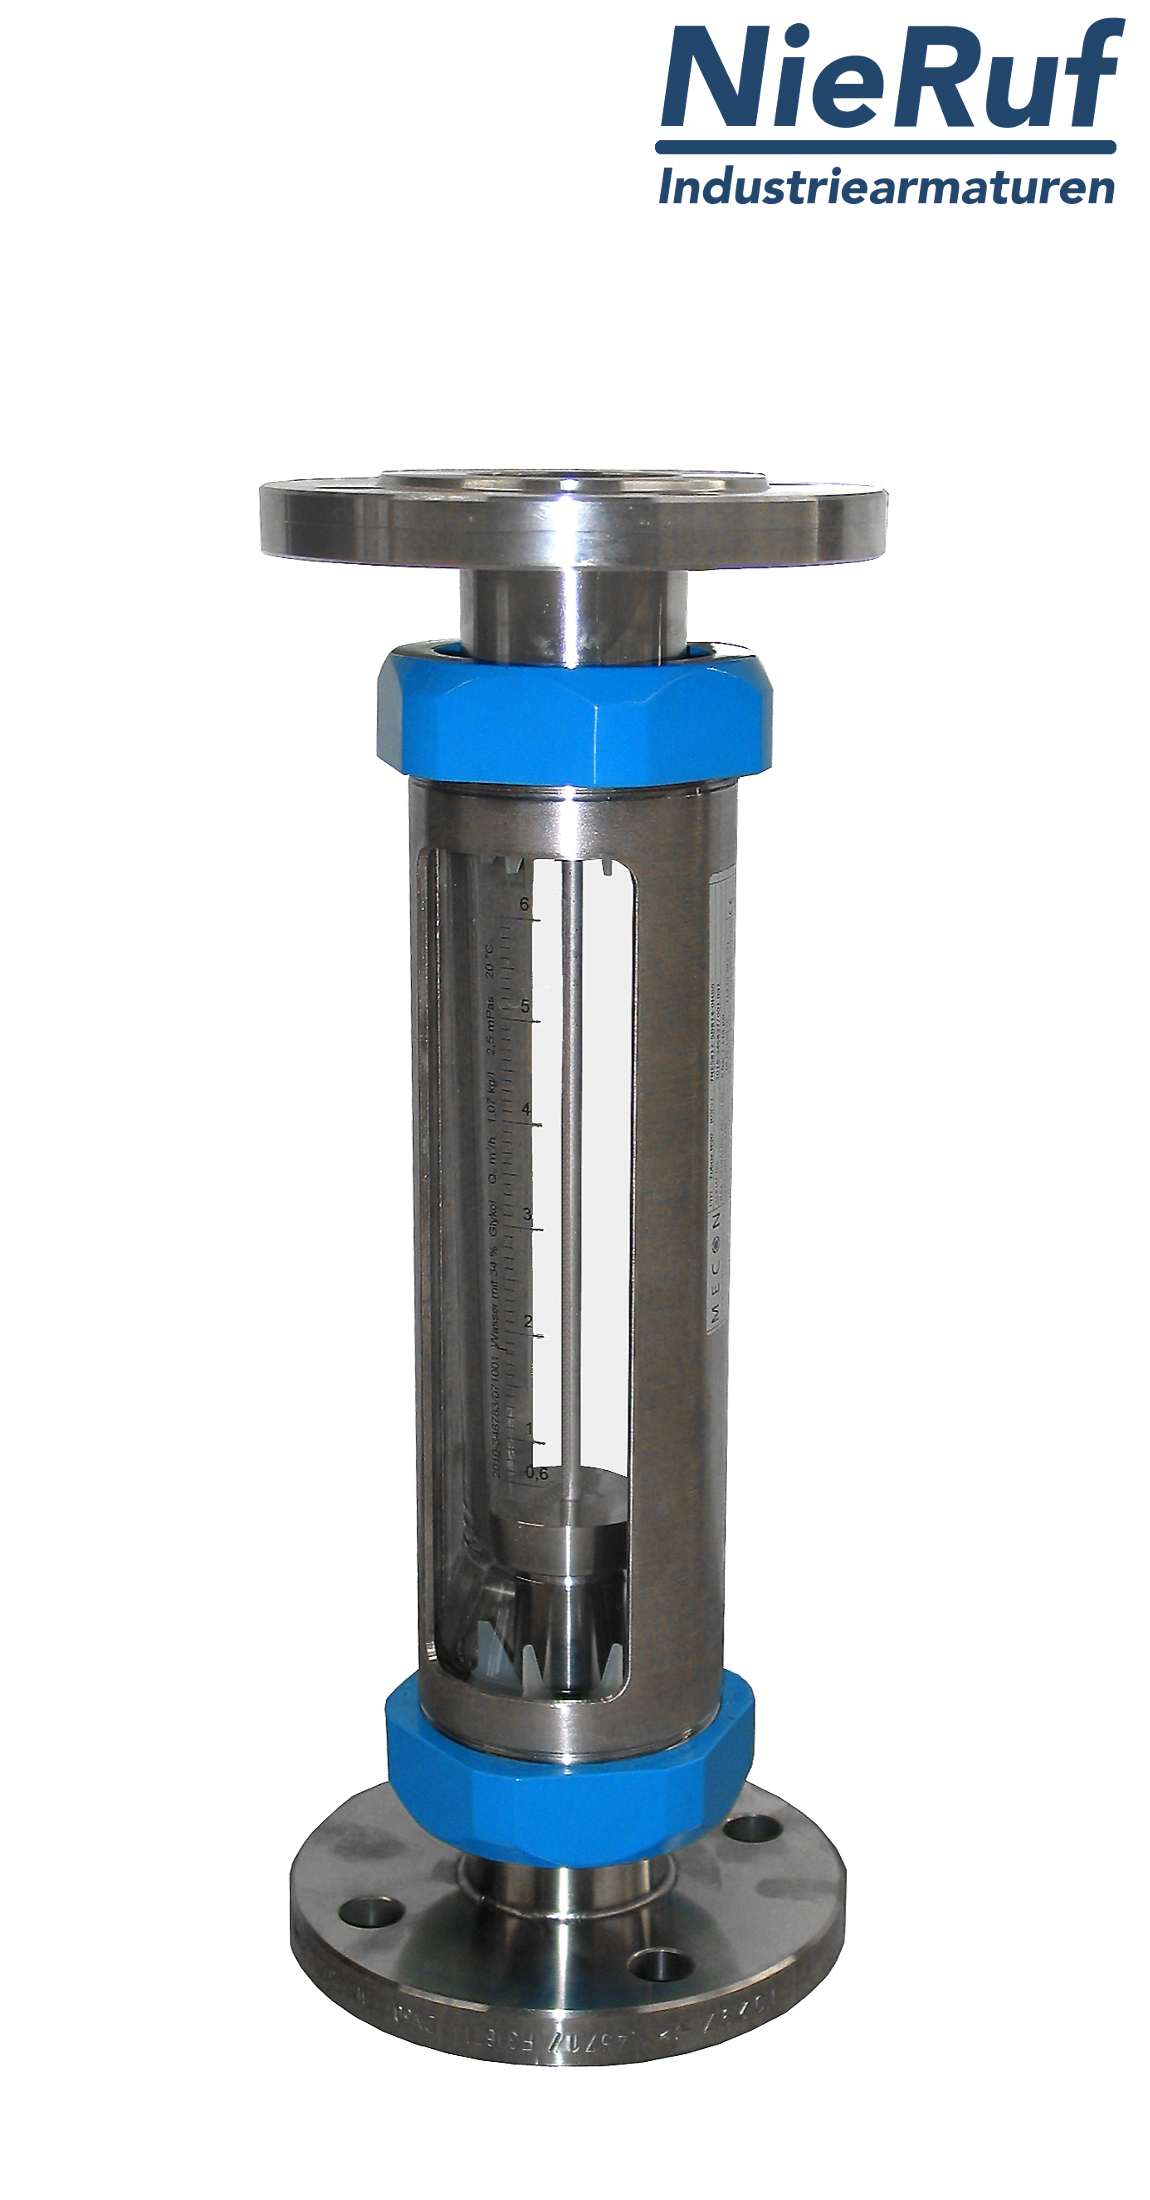 Variable area flowmeter stainless steel + borosilicate flange DN10 50.0 - 500.0 l/h water FKM